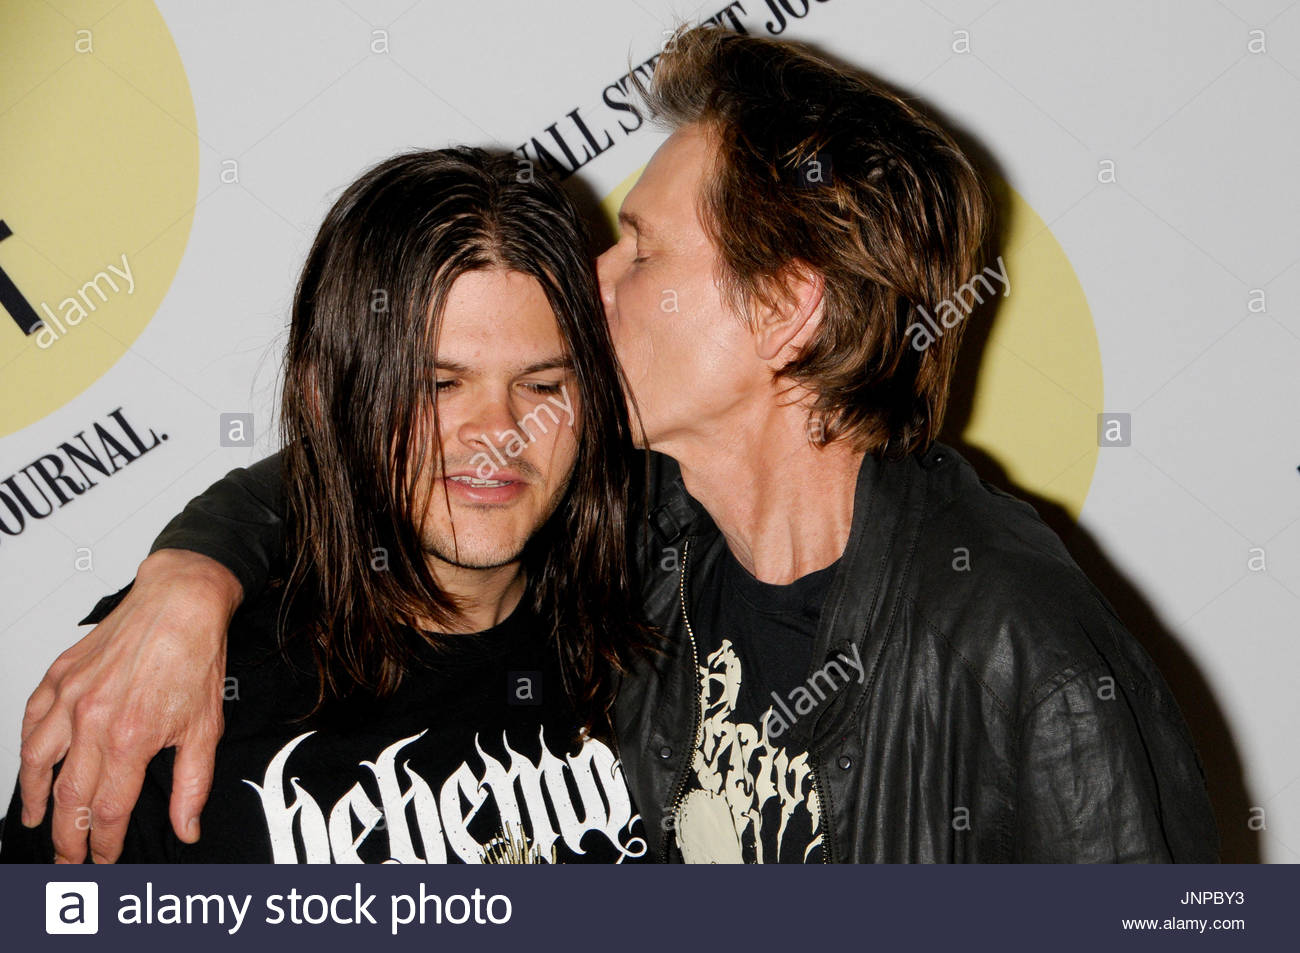 kevin-bacon-and-son-travis-bacon-cop-car-premiere-held-at-bam-rose-JNPBY3.jpg